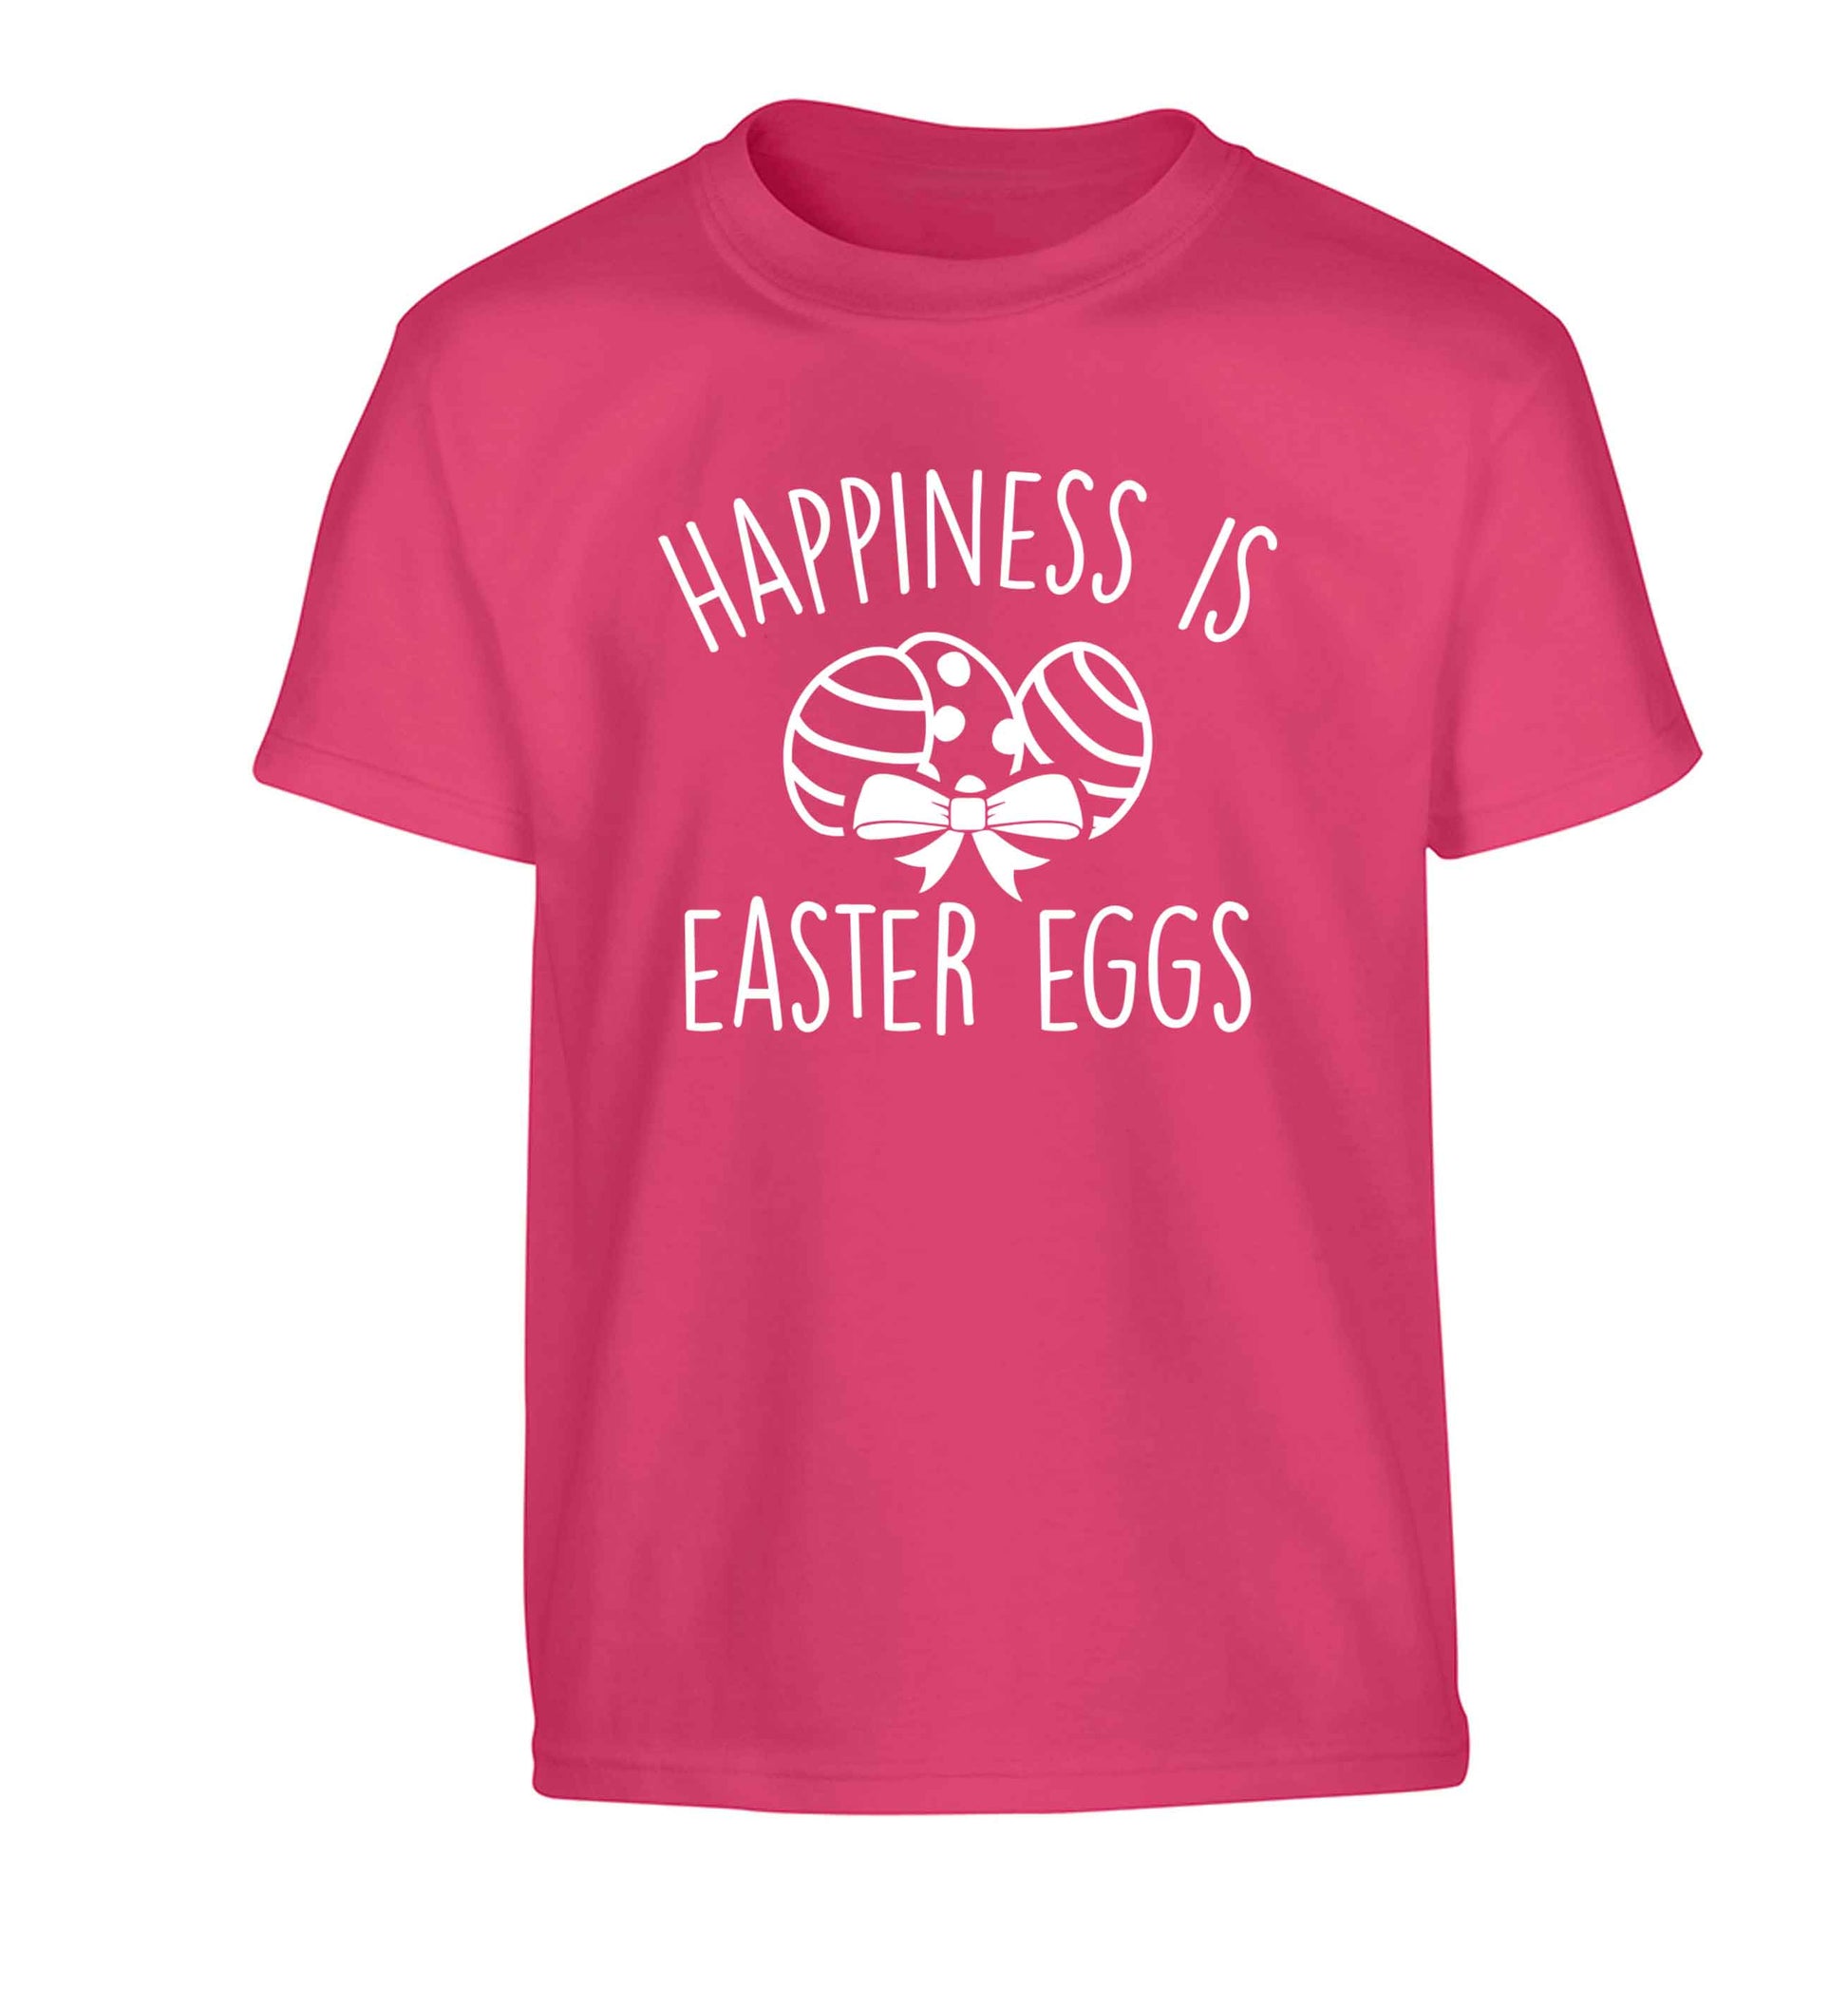 Happiness is Easter eggs Children's pink Tshirt 12-13 Years